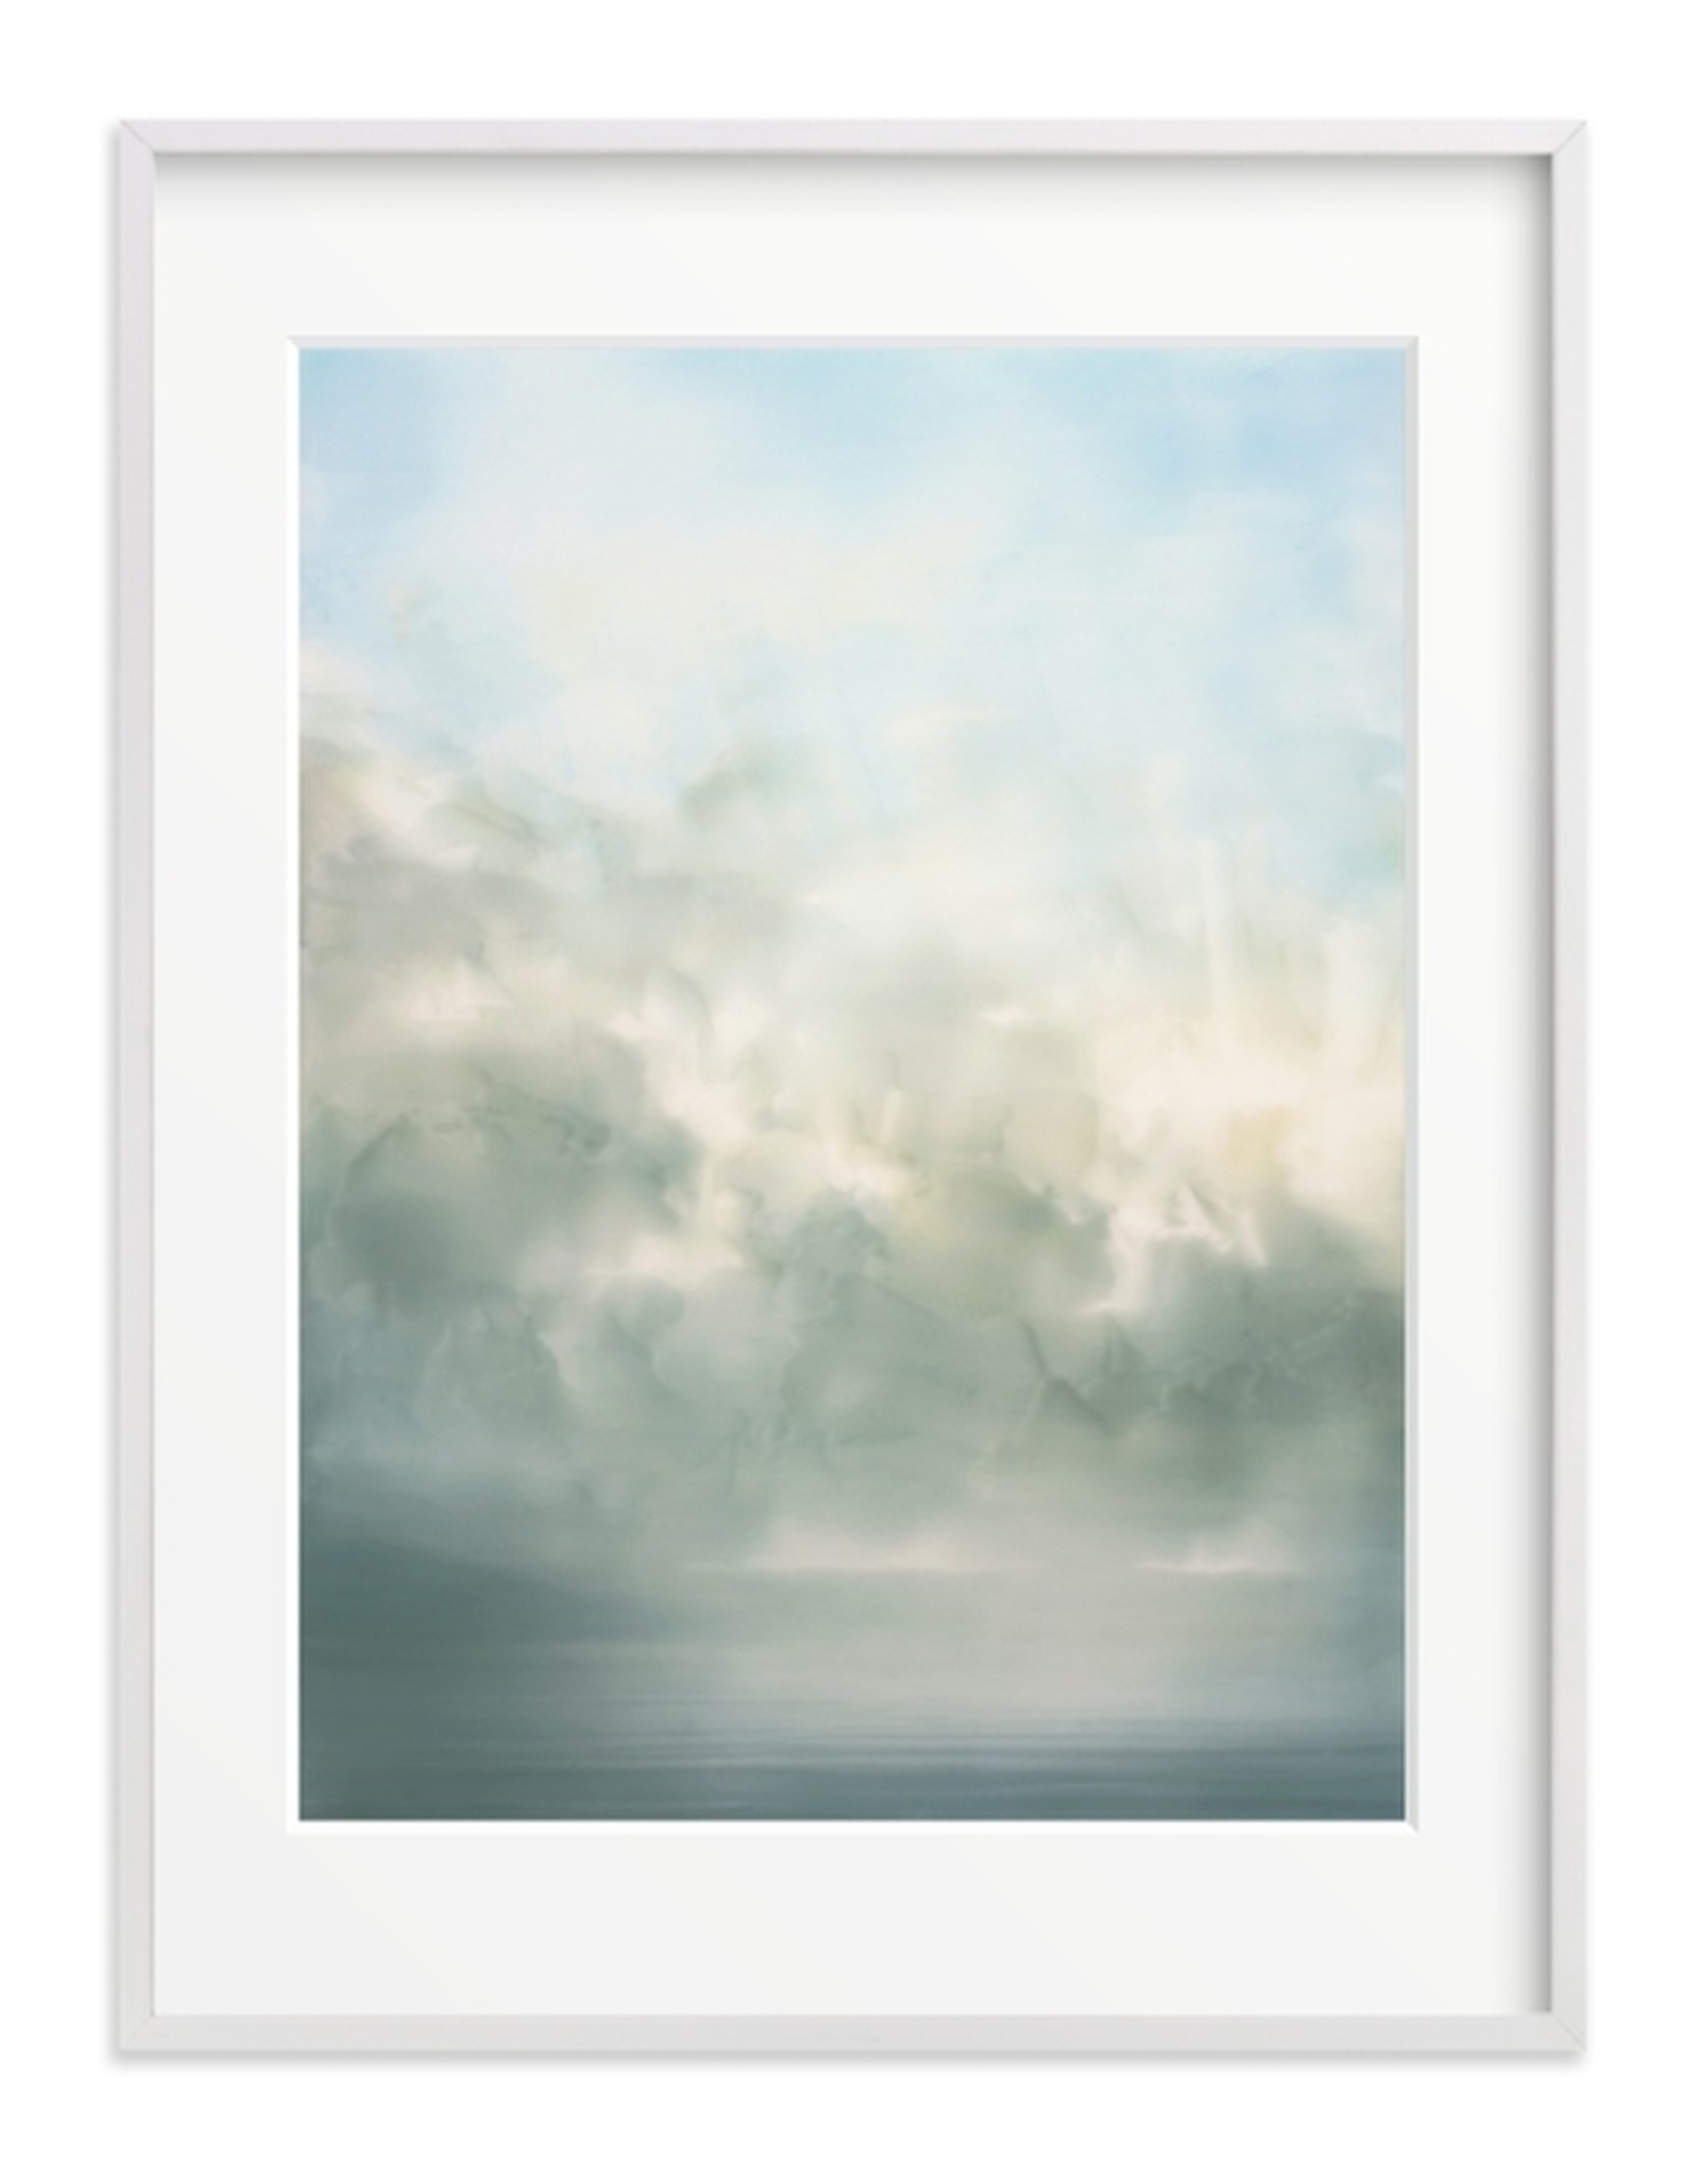 Day dream - 30"x40" - Matted - Minted